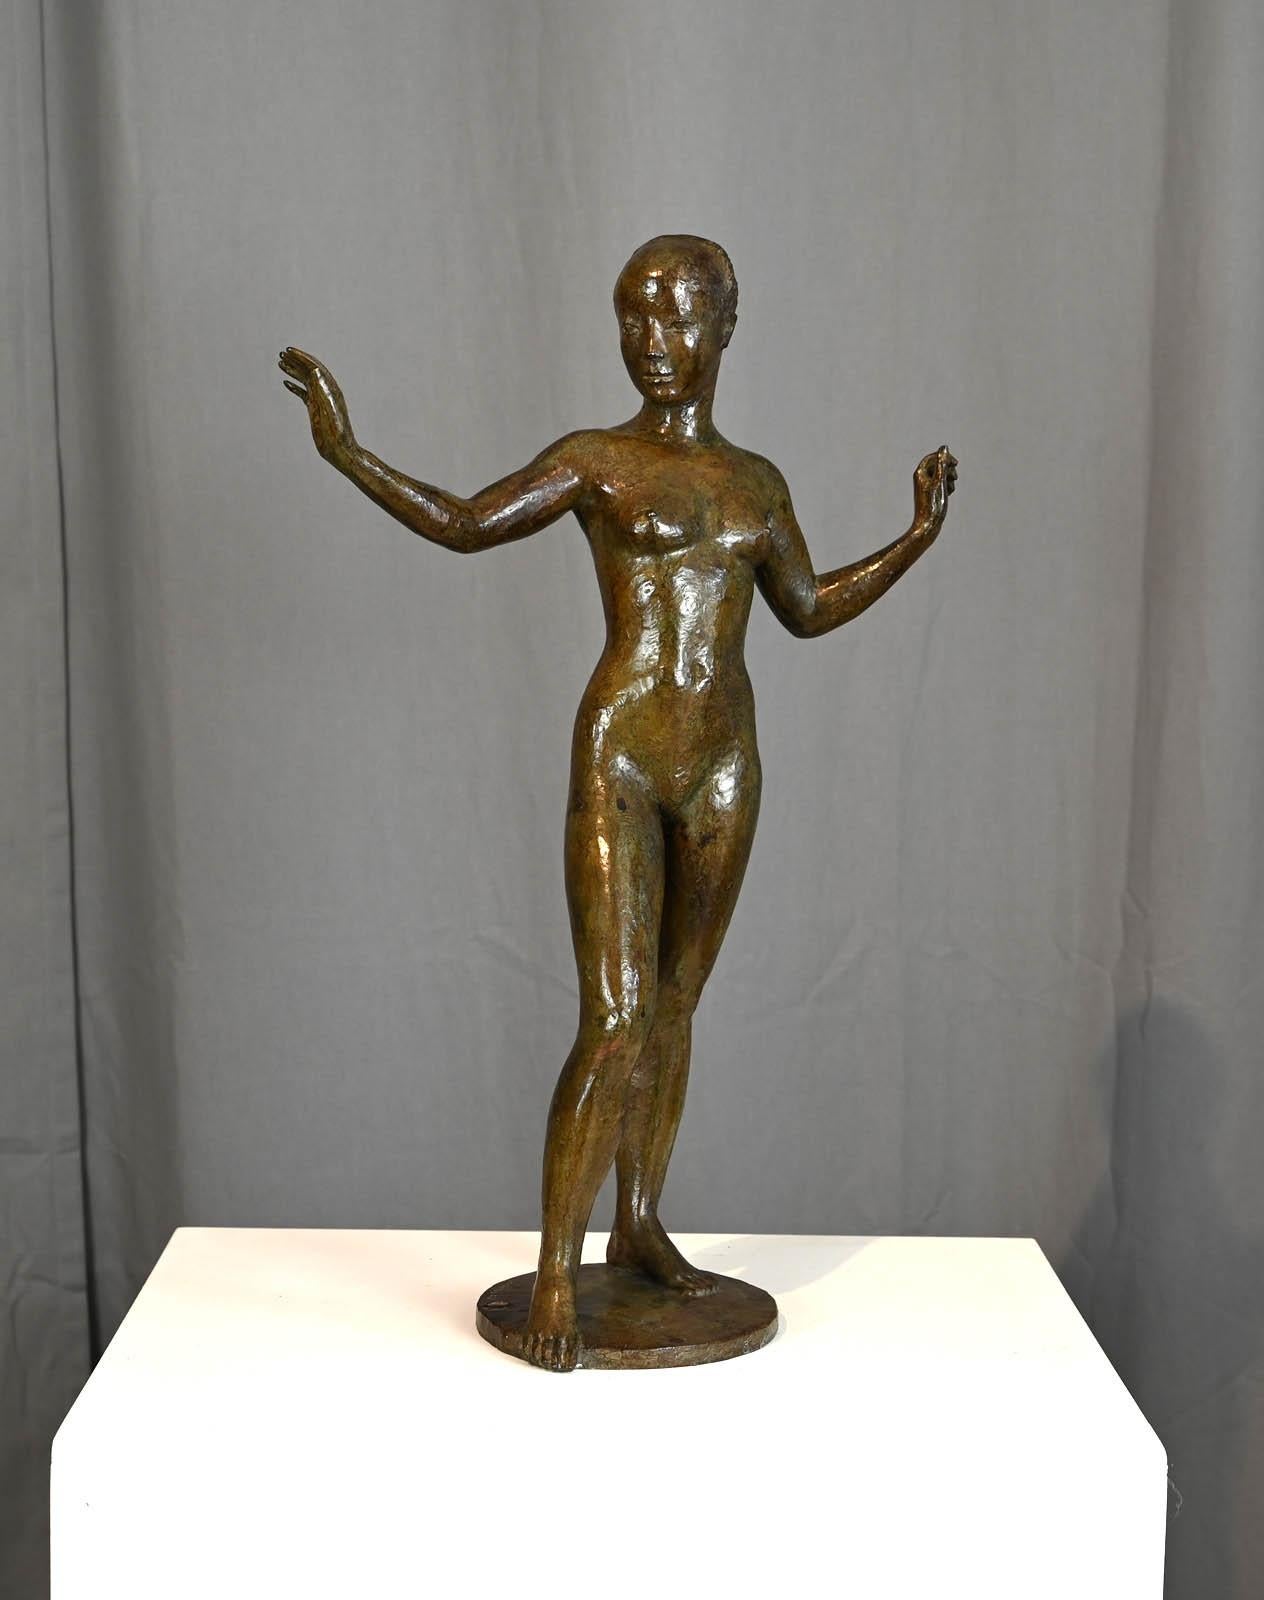 Jacques COQUILLAY (né en 1935) 

Marie

Original bronze
Size : 56x39x17cm
Copy No. 4/8
Signature and numbered on the base.
Original bronze made with “lost wax”
The edition of the bronzes is limited by law to 8 copies, supplemented by 4 annotated